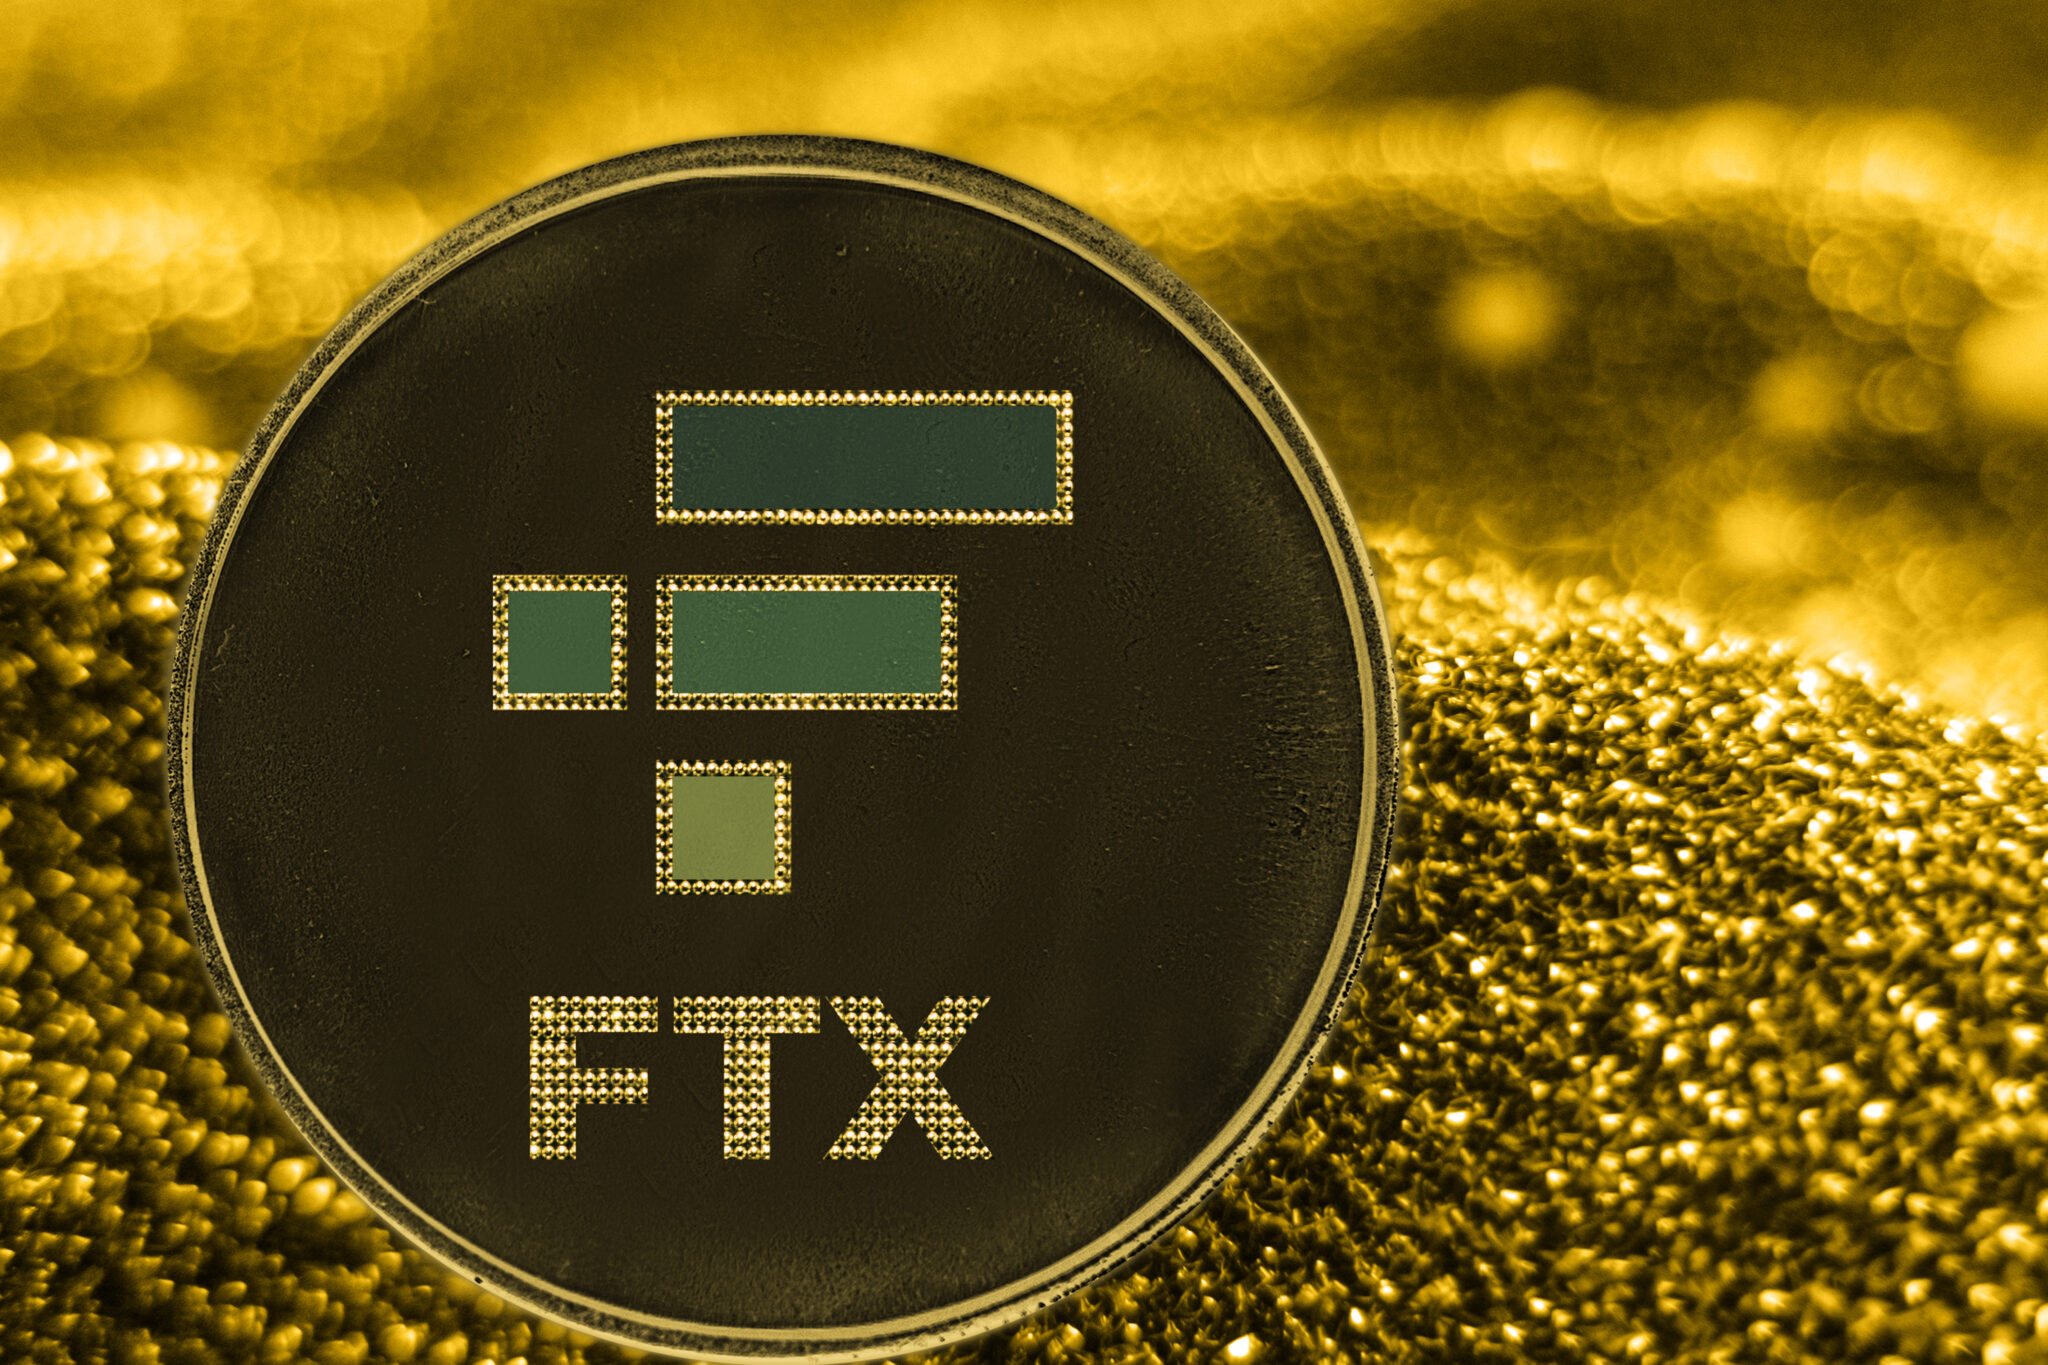 the coin cryptocurrency ftx token on golden background.